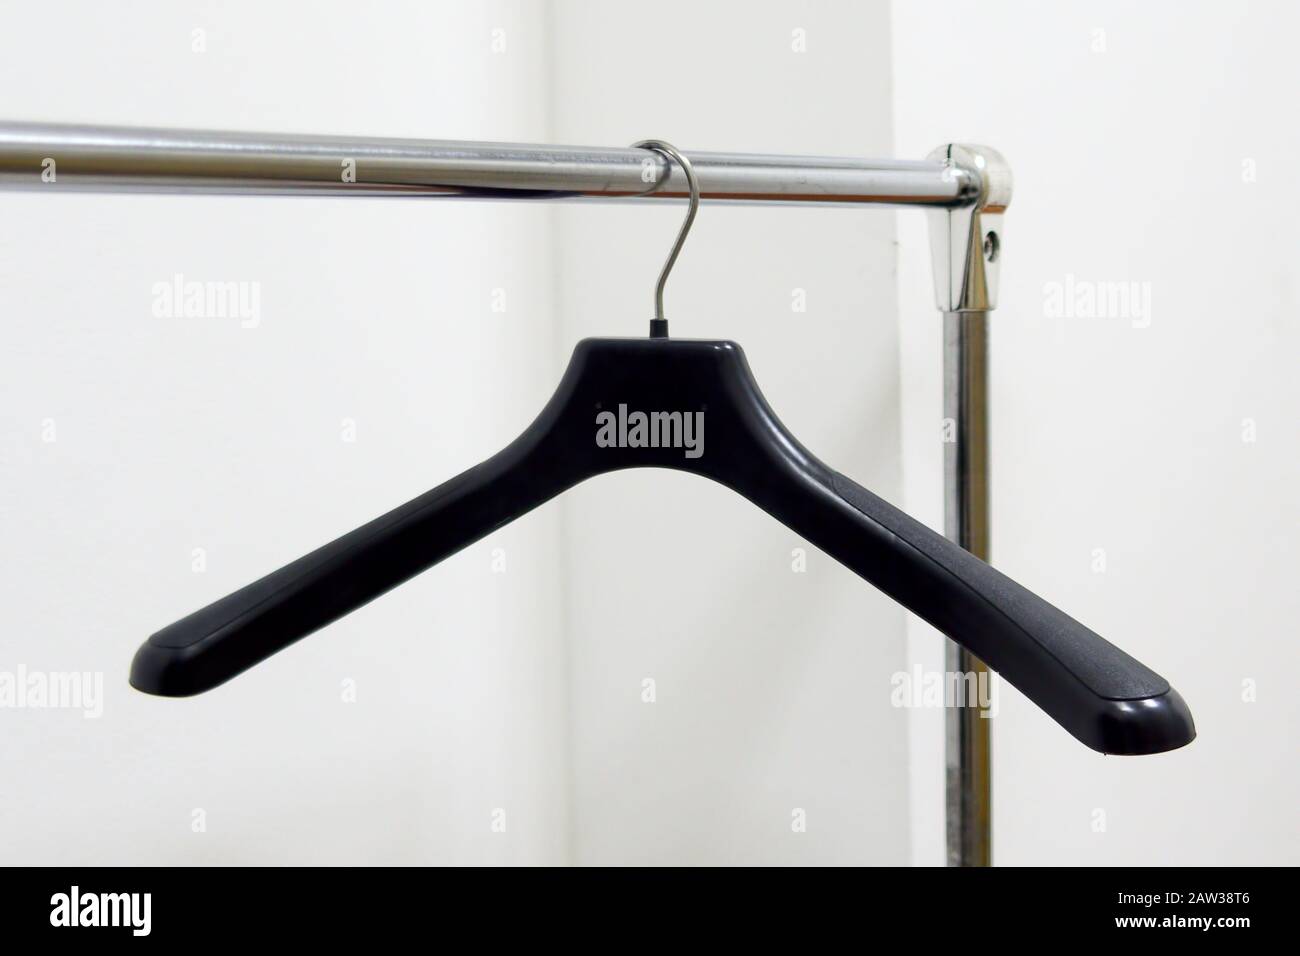 Empty plastic hangers hanging in a wardrobe for clothes Stock Photo